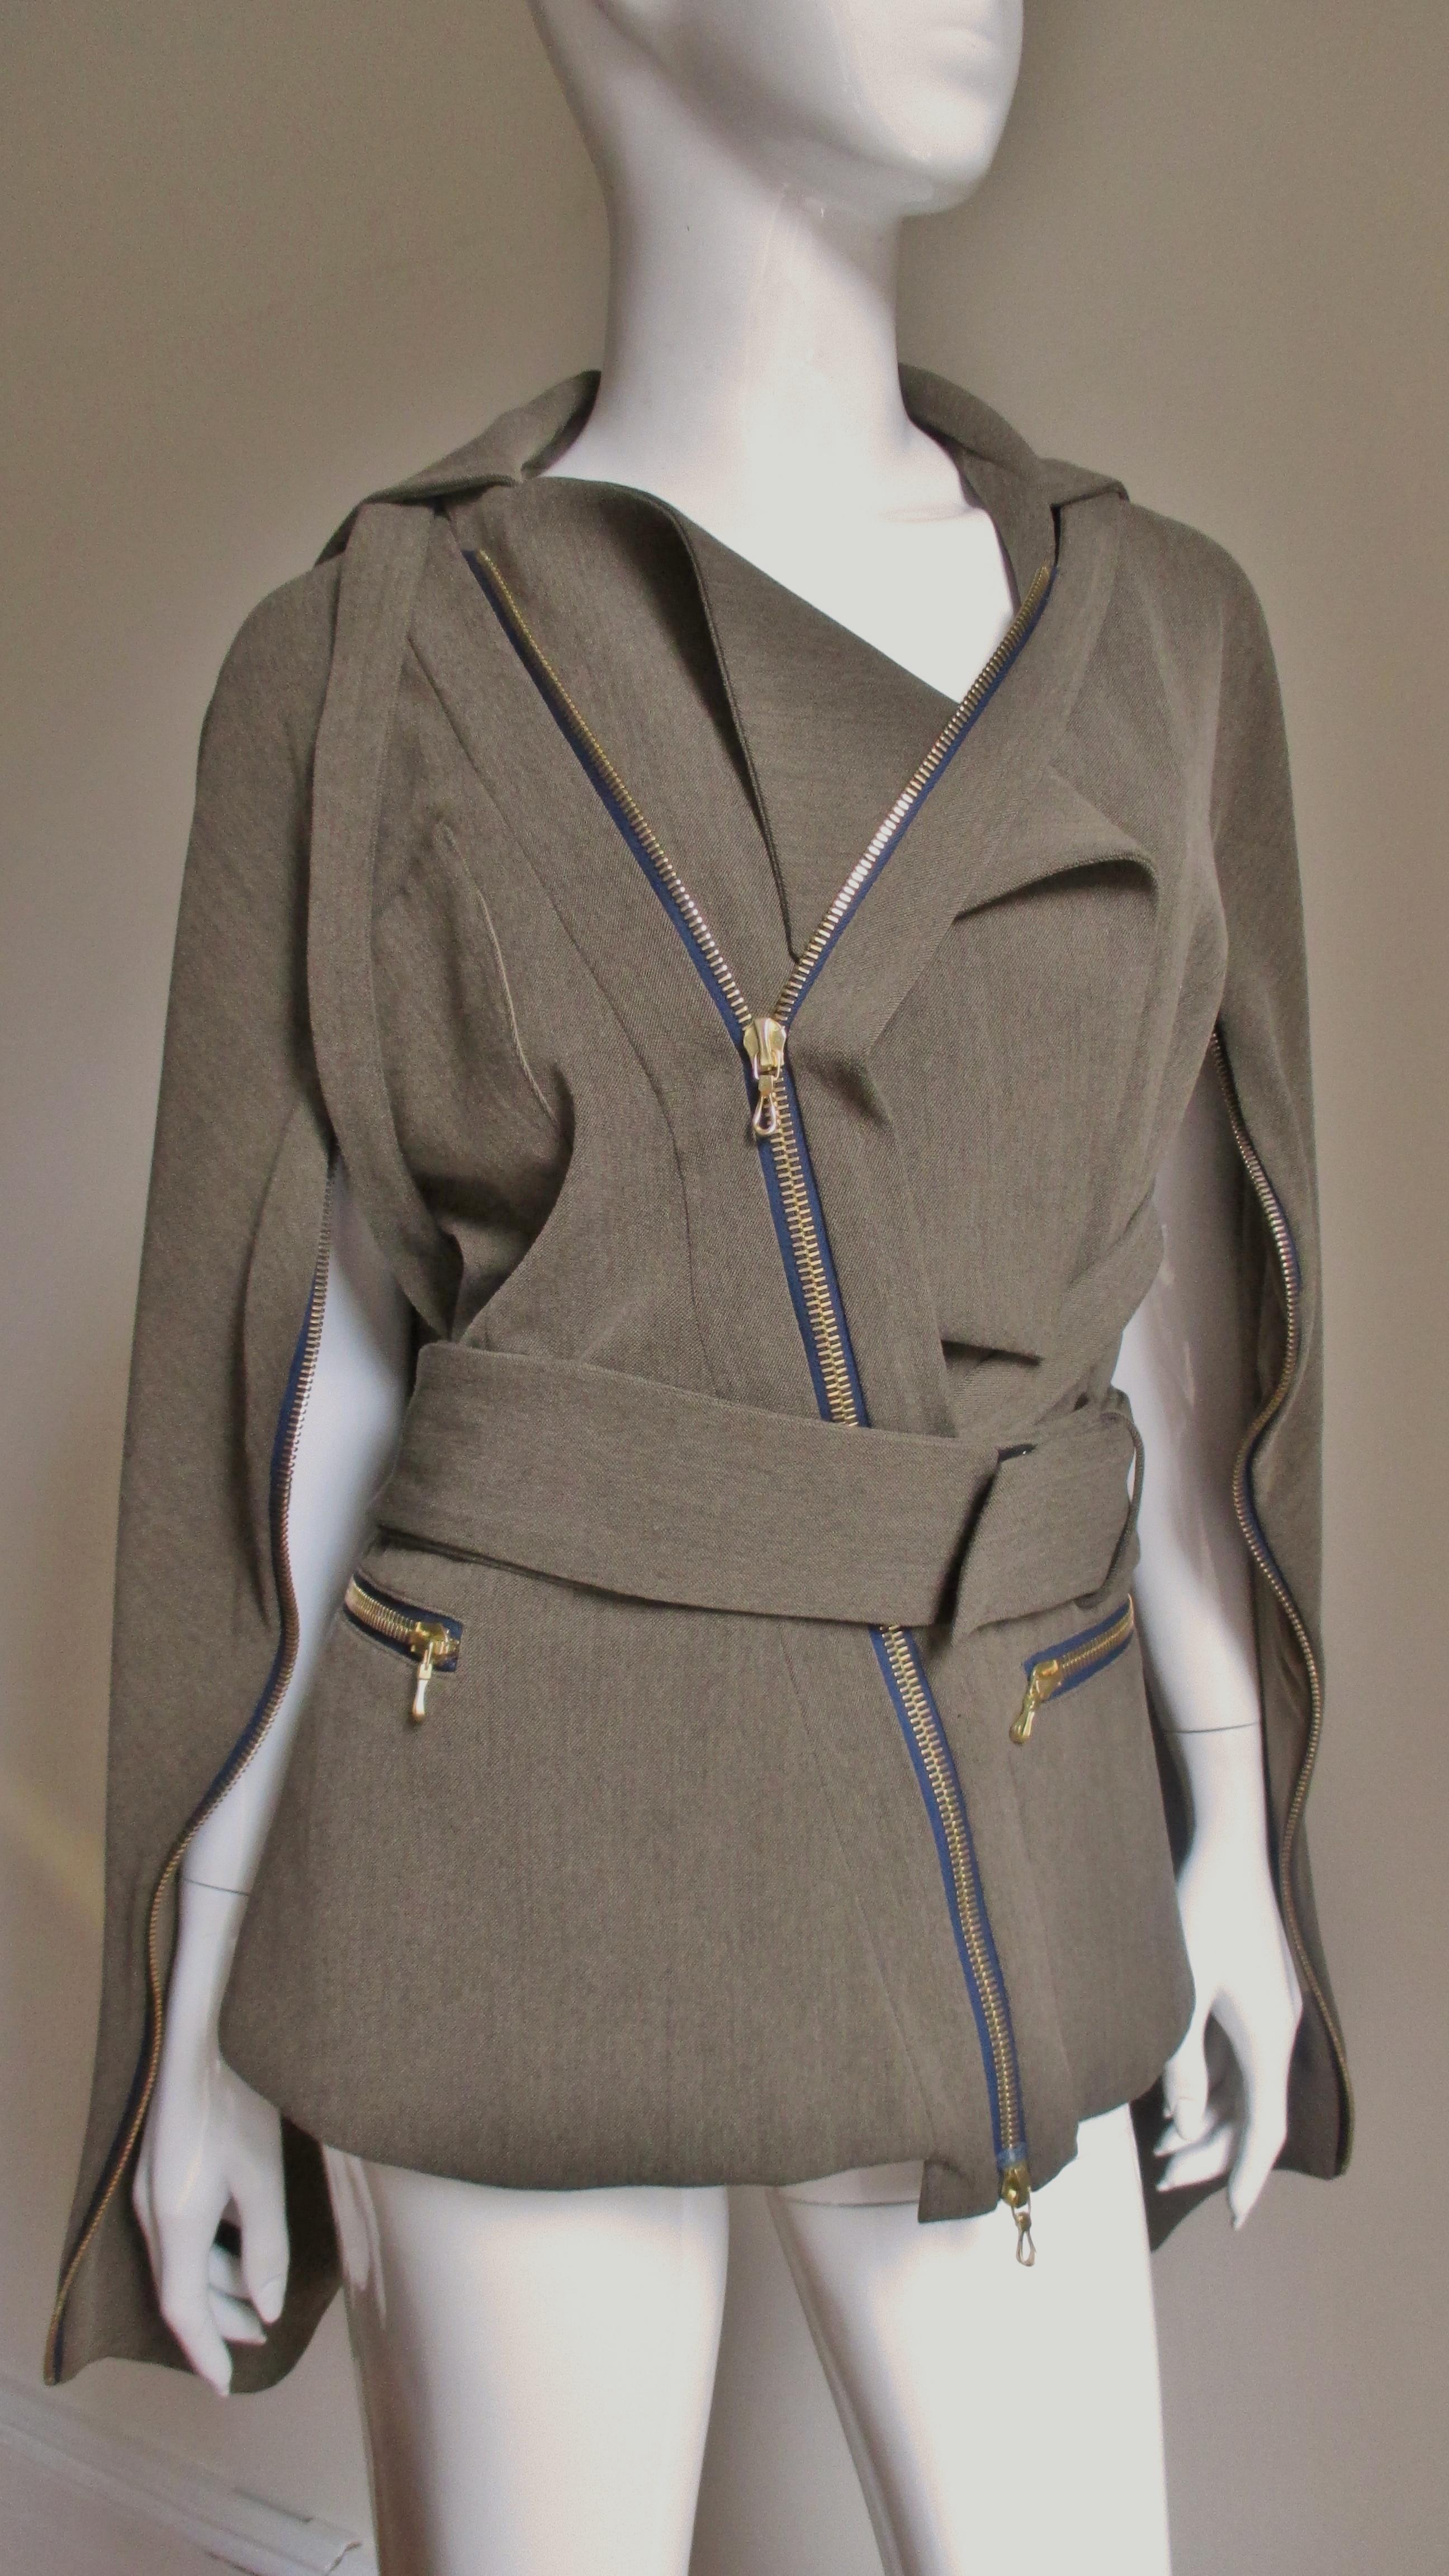 Vivienne Westwood Convertible Jacket In Excellent Condition For Sale In Water Mill, NY